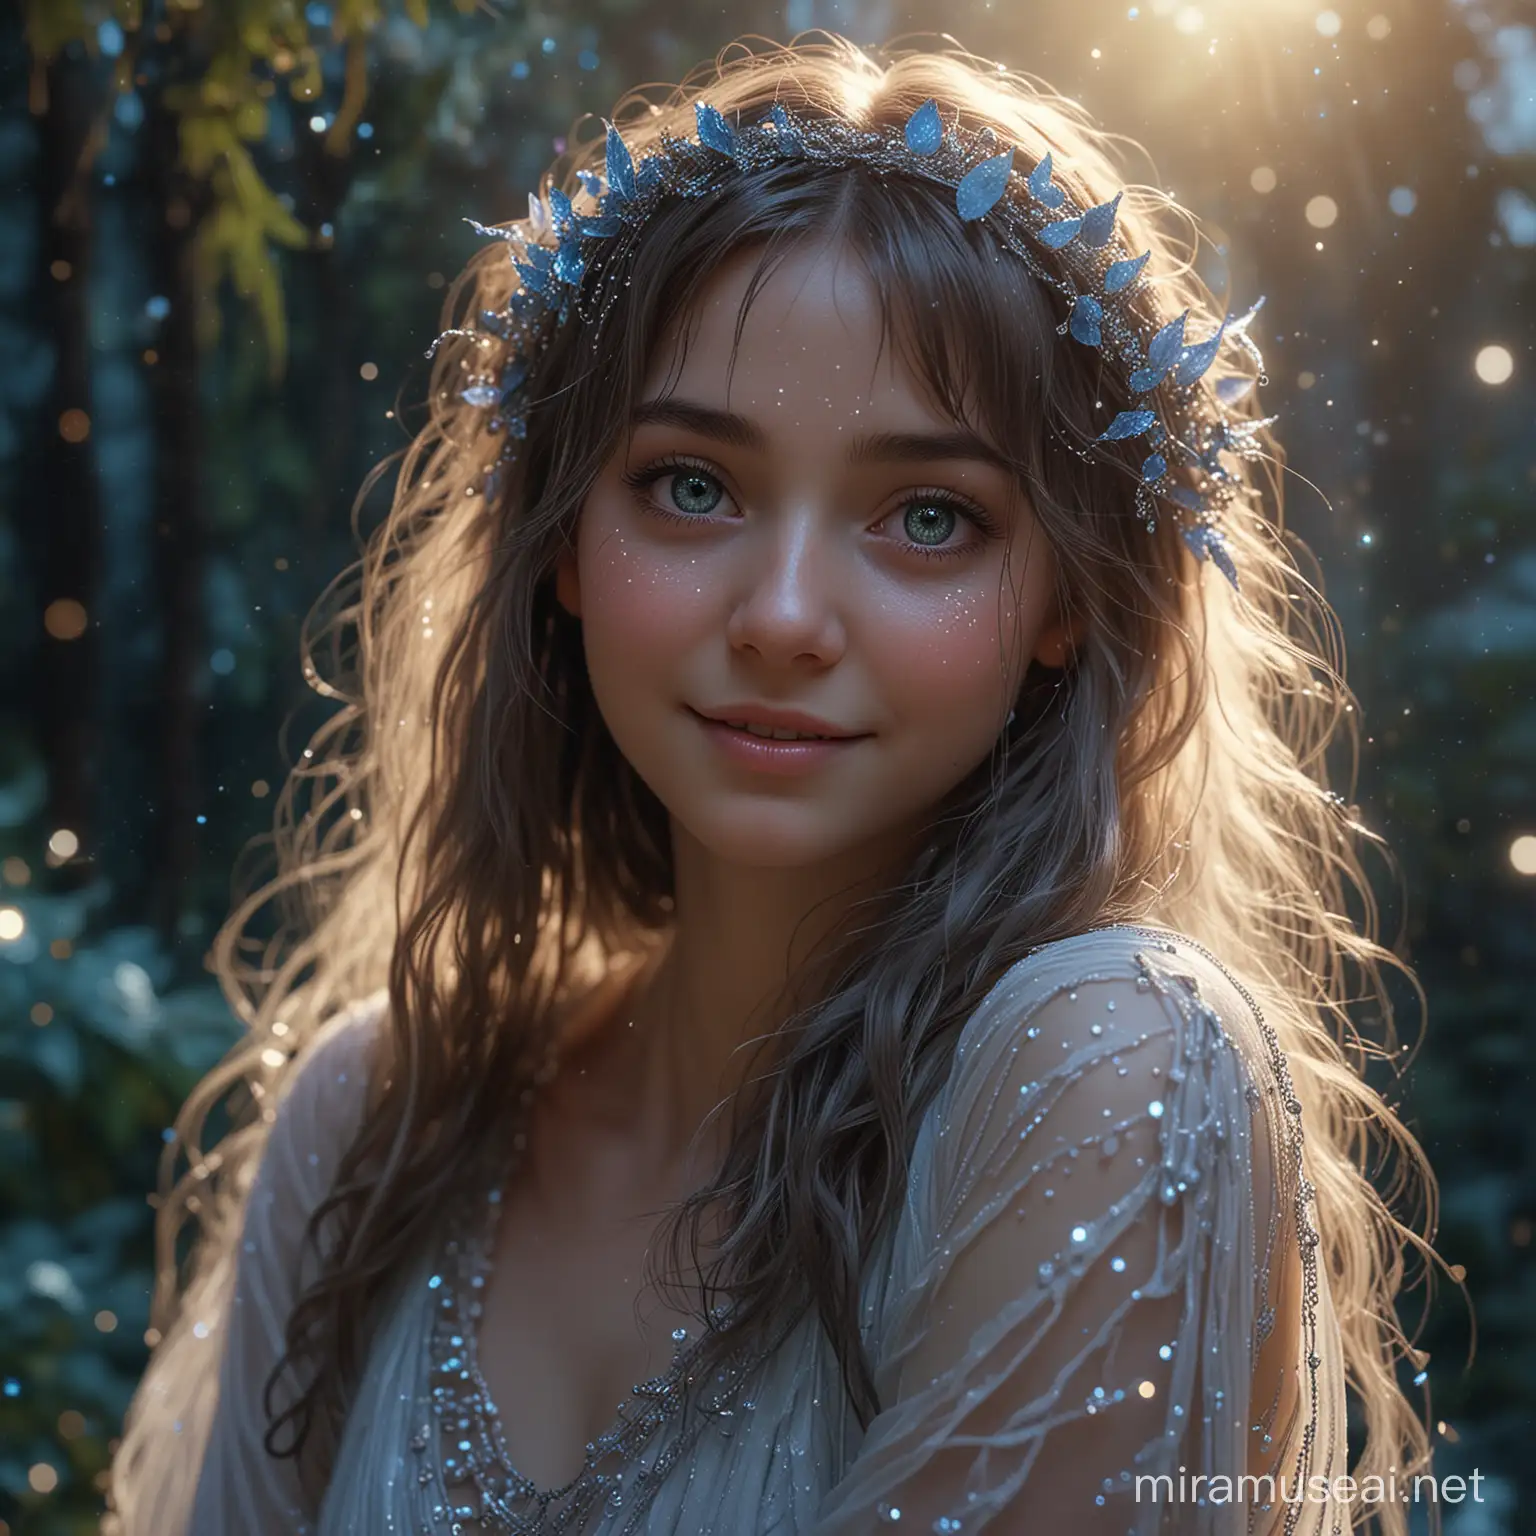 Ethereal Spirit with Mischievous Smile in Cinematic Fantasy Landscape